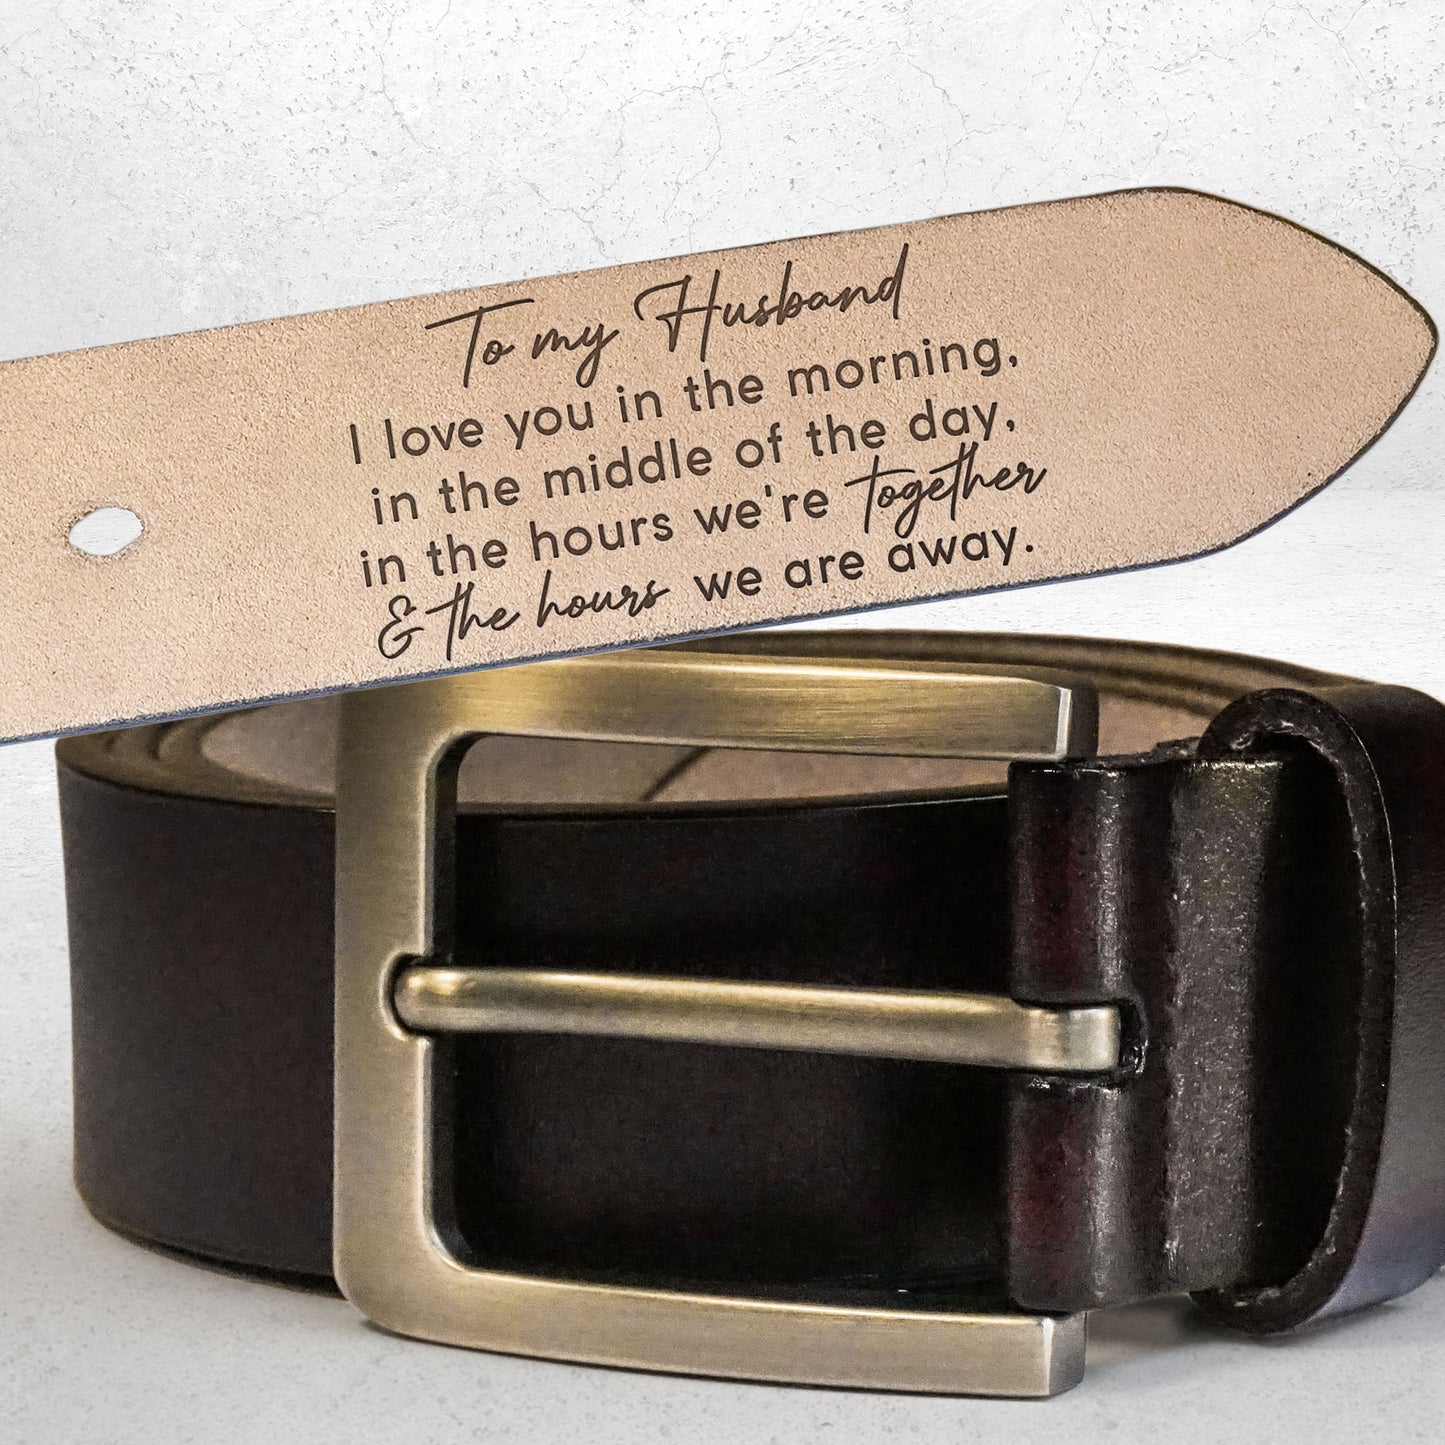 I Love You Every Day - Personalized Engraved Leather Belt